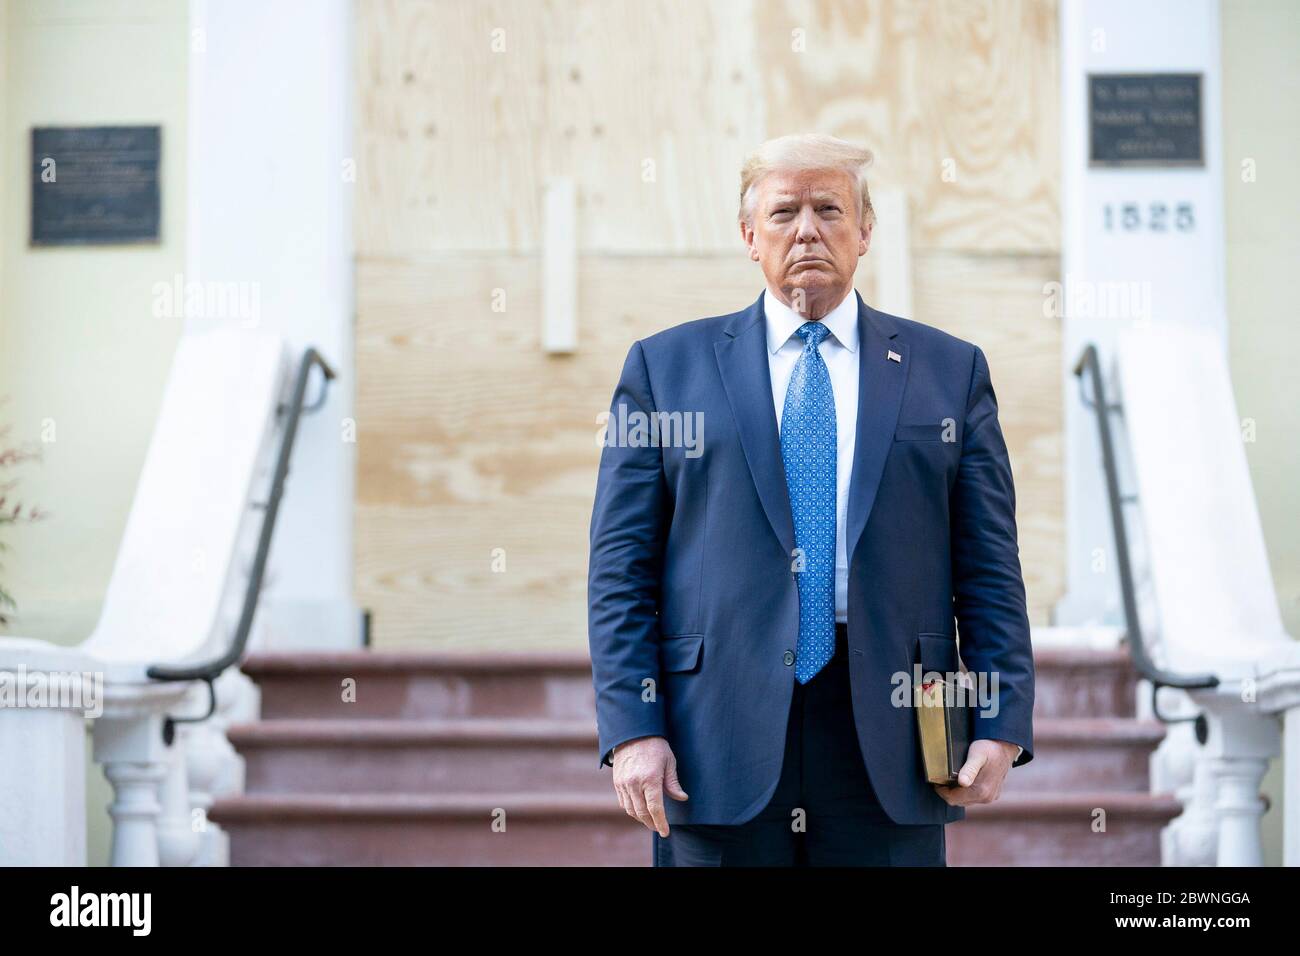 U.S. President Trump Visits St. John's Episcopal Church. President Donald J. Trump walks from the White House Monday evening, June 1, 2020, to St. John’s Episcopal Church, known as the church of Presidents’s, that was damaged by fire during demonstrations in nearby LaFayette Square Sunday evening. Stock Photo